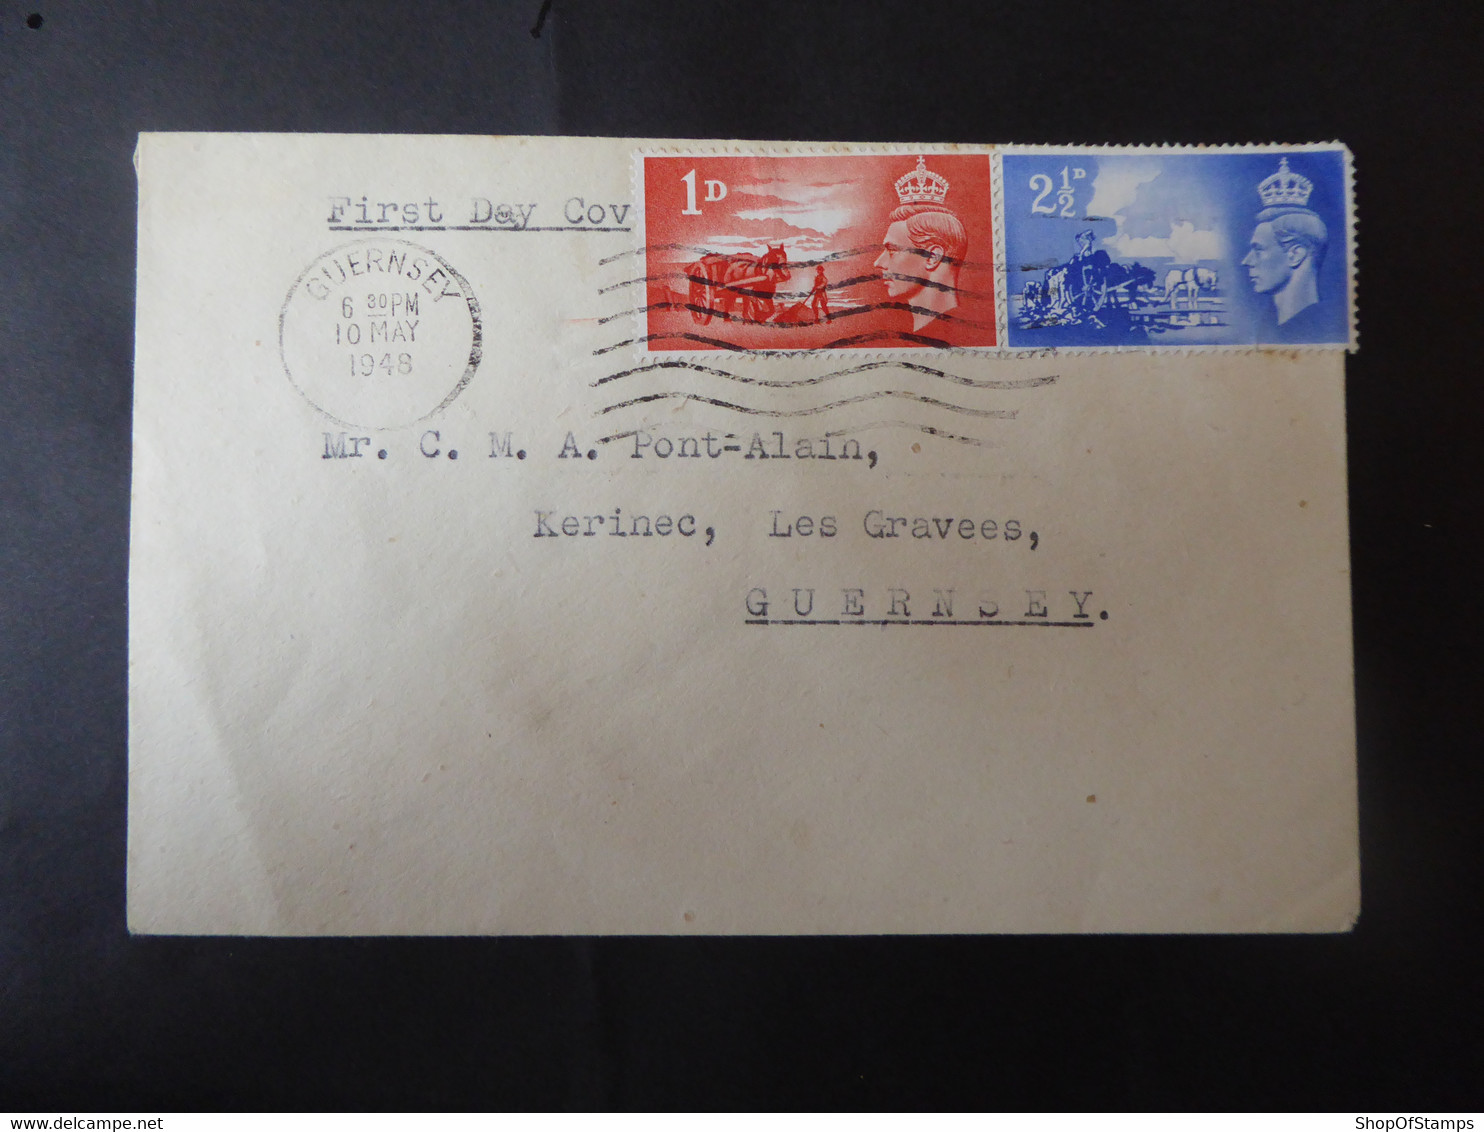 CHANNEL ISLANDS SG C1-2 FDC WITH POSTMARK GUERNSEY 10 MAY 1942 - Unclassified